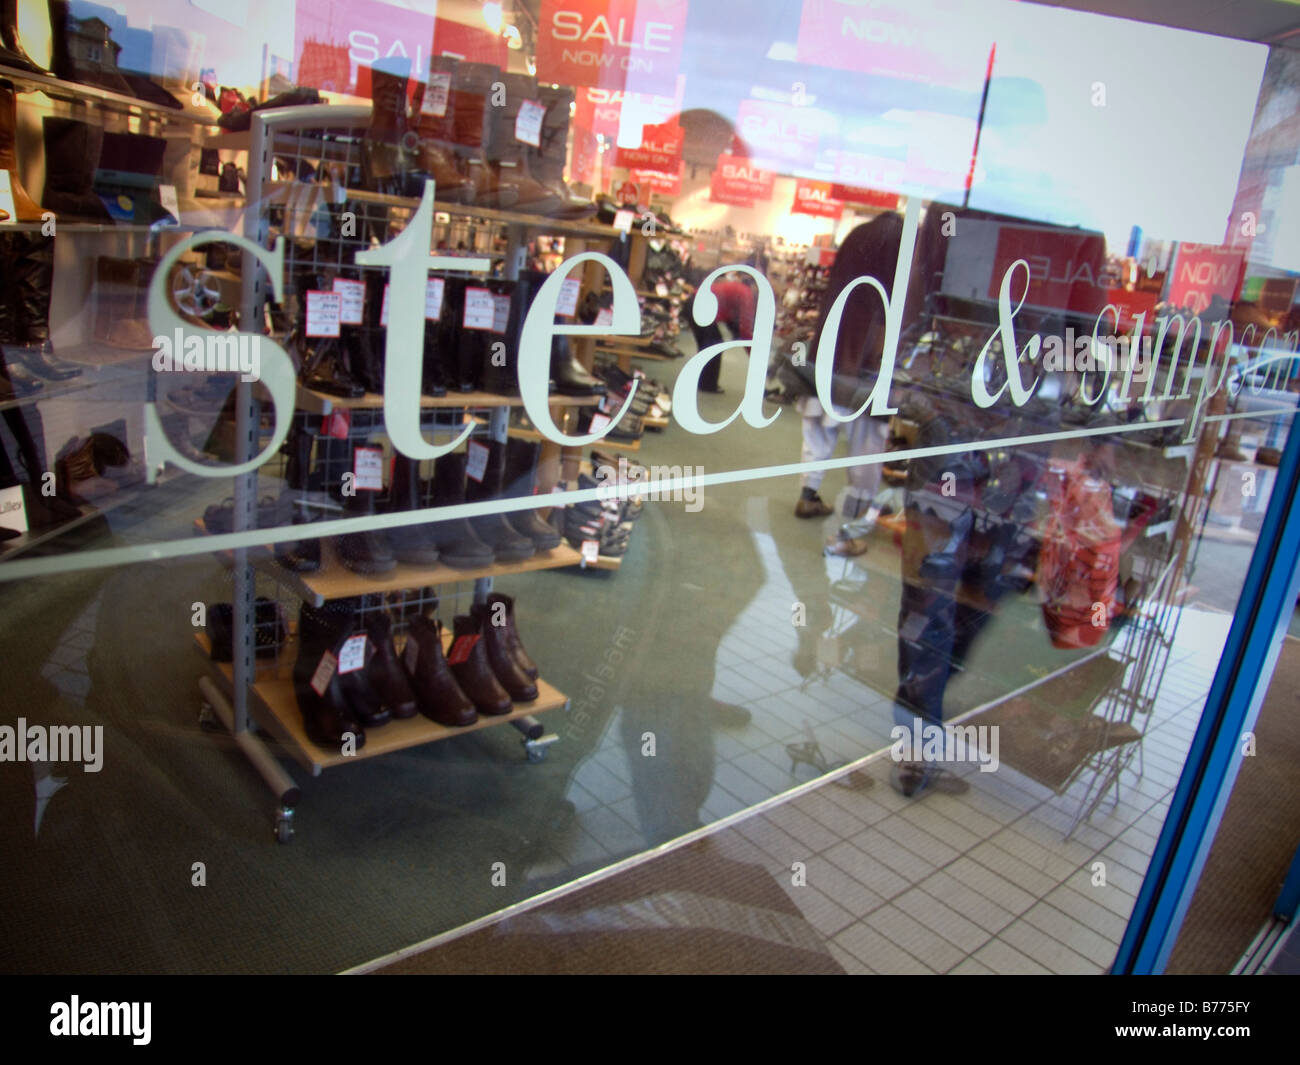 The window and reflections of the shoe retailer Stead & Simpson Stock Photo